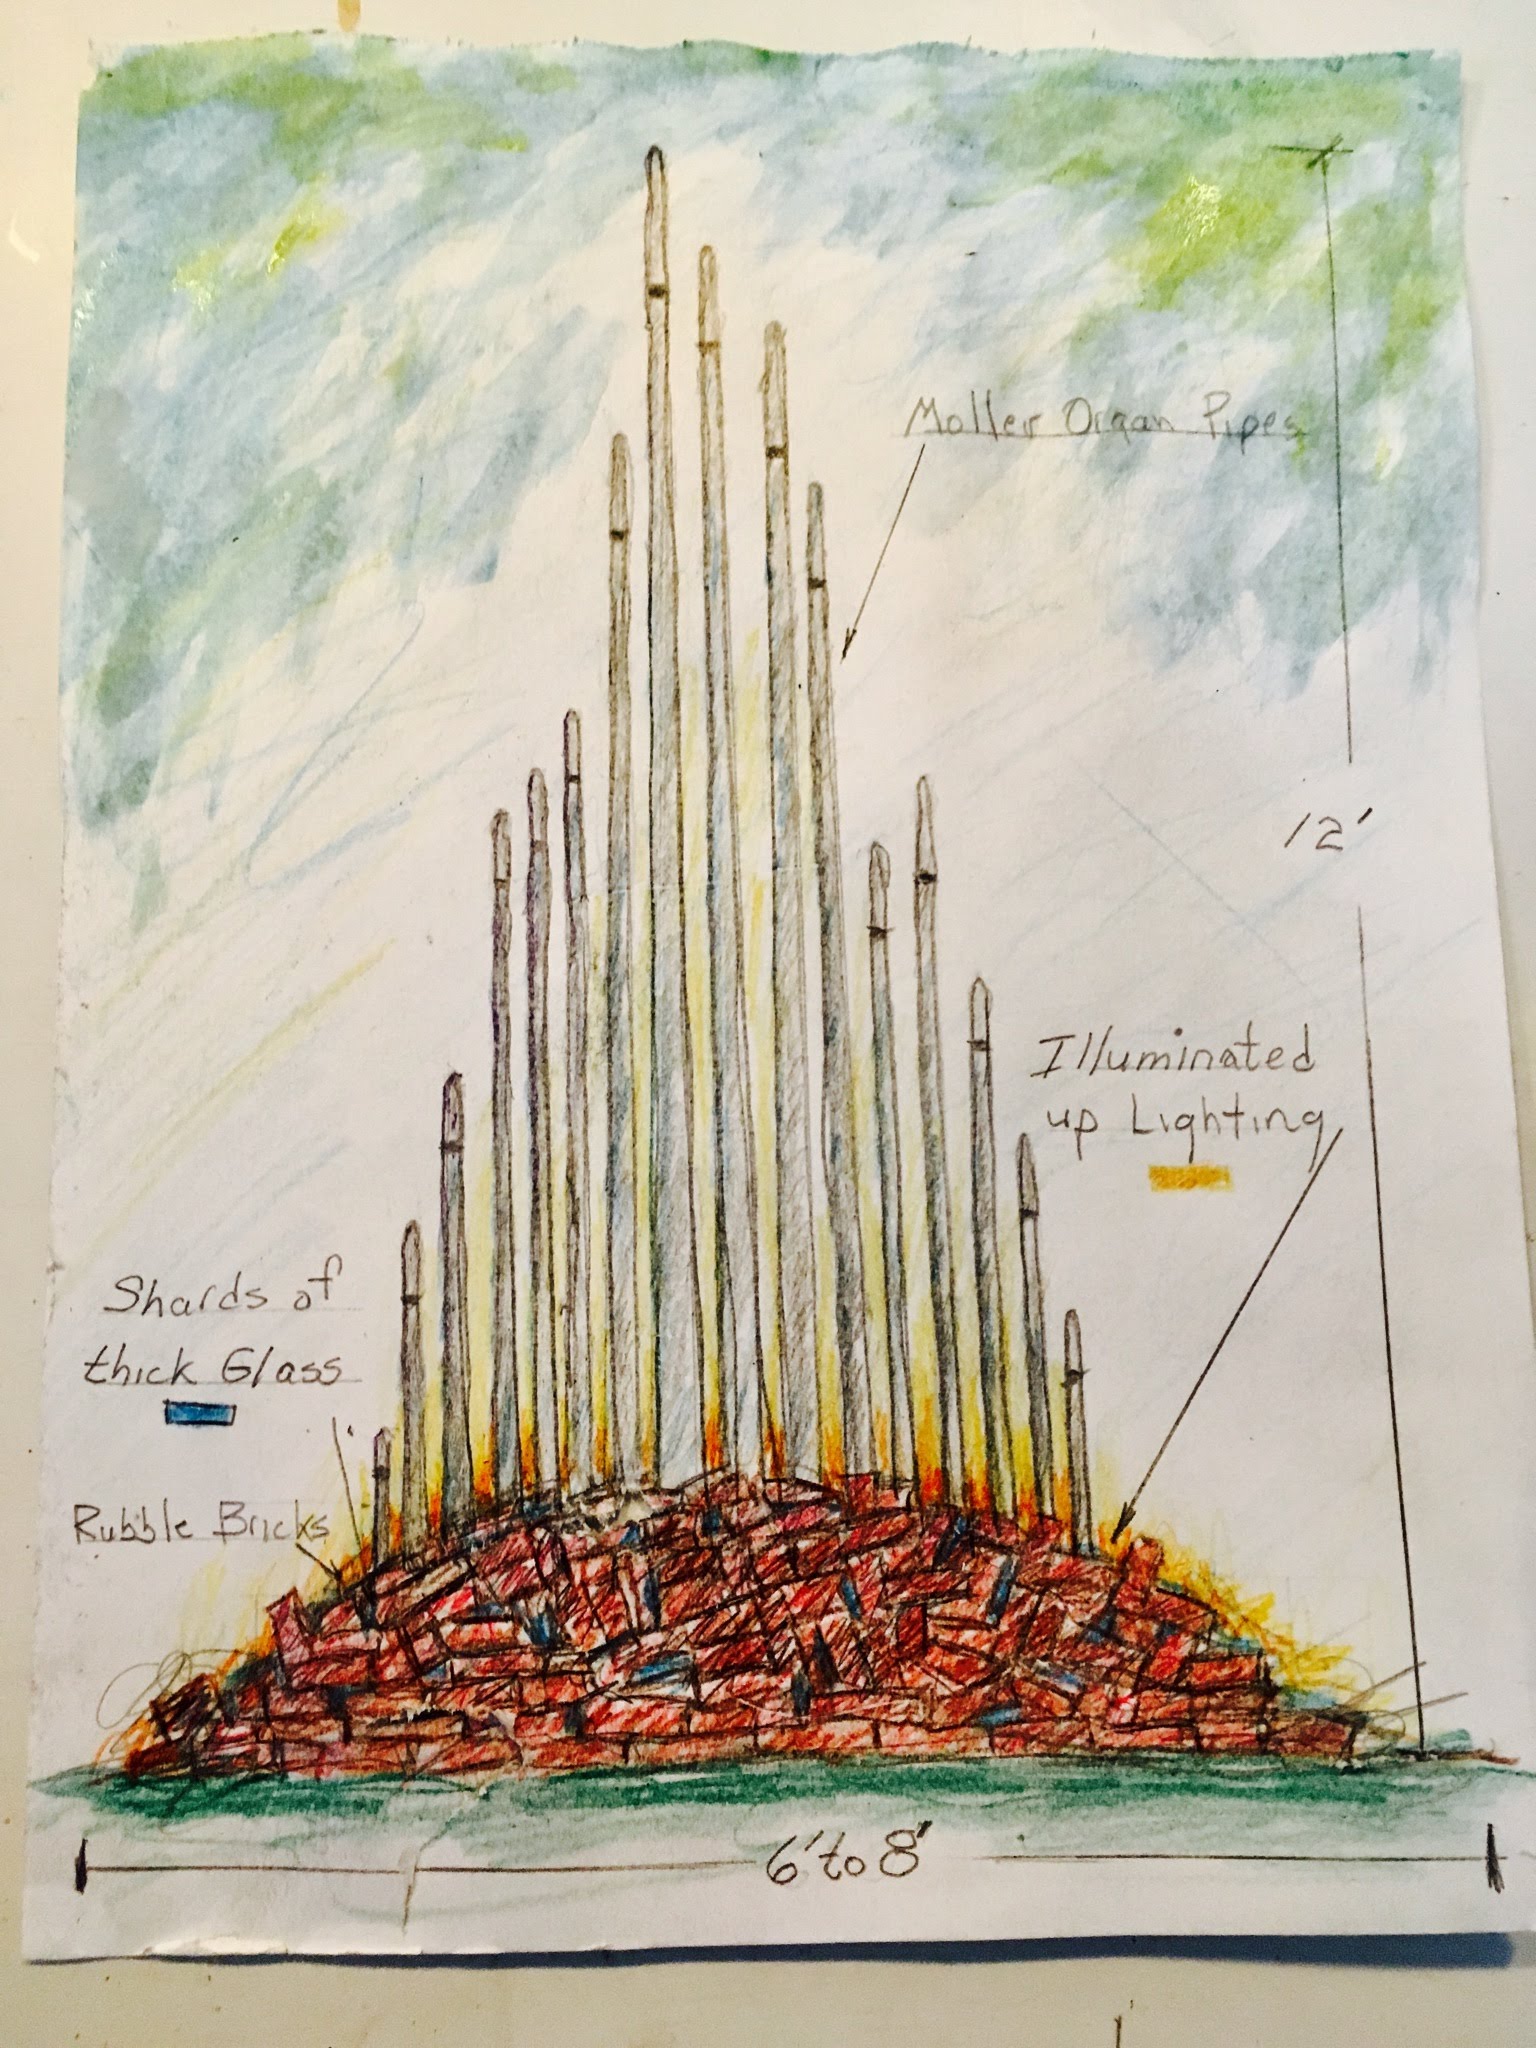 Drawing of organ pipes emerging from a rubble pile of brick.